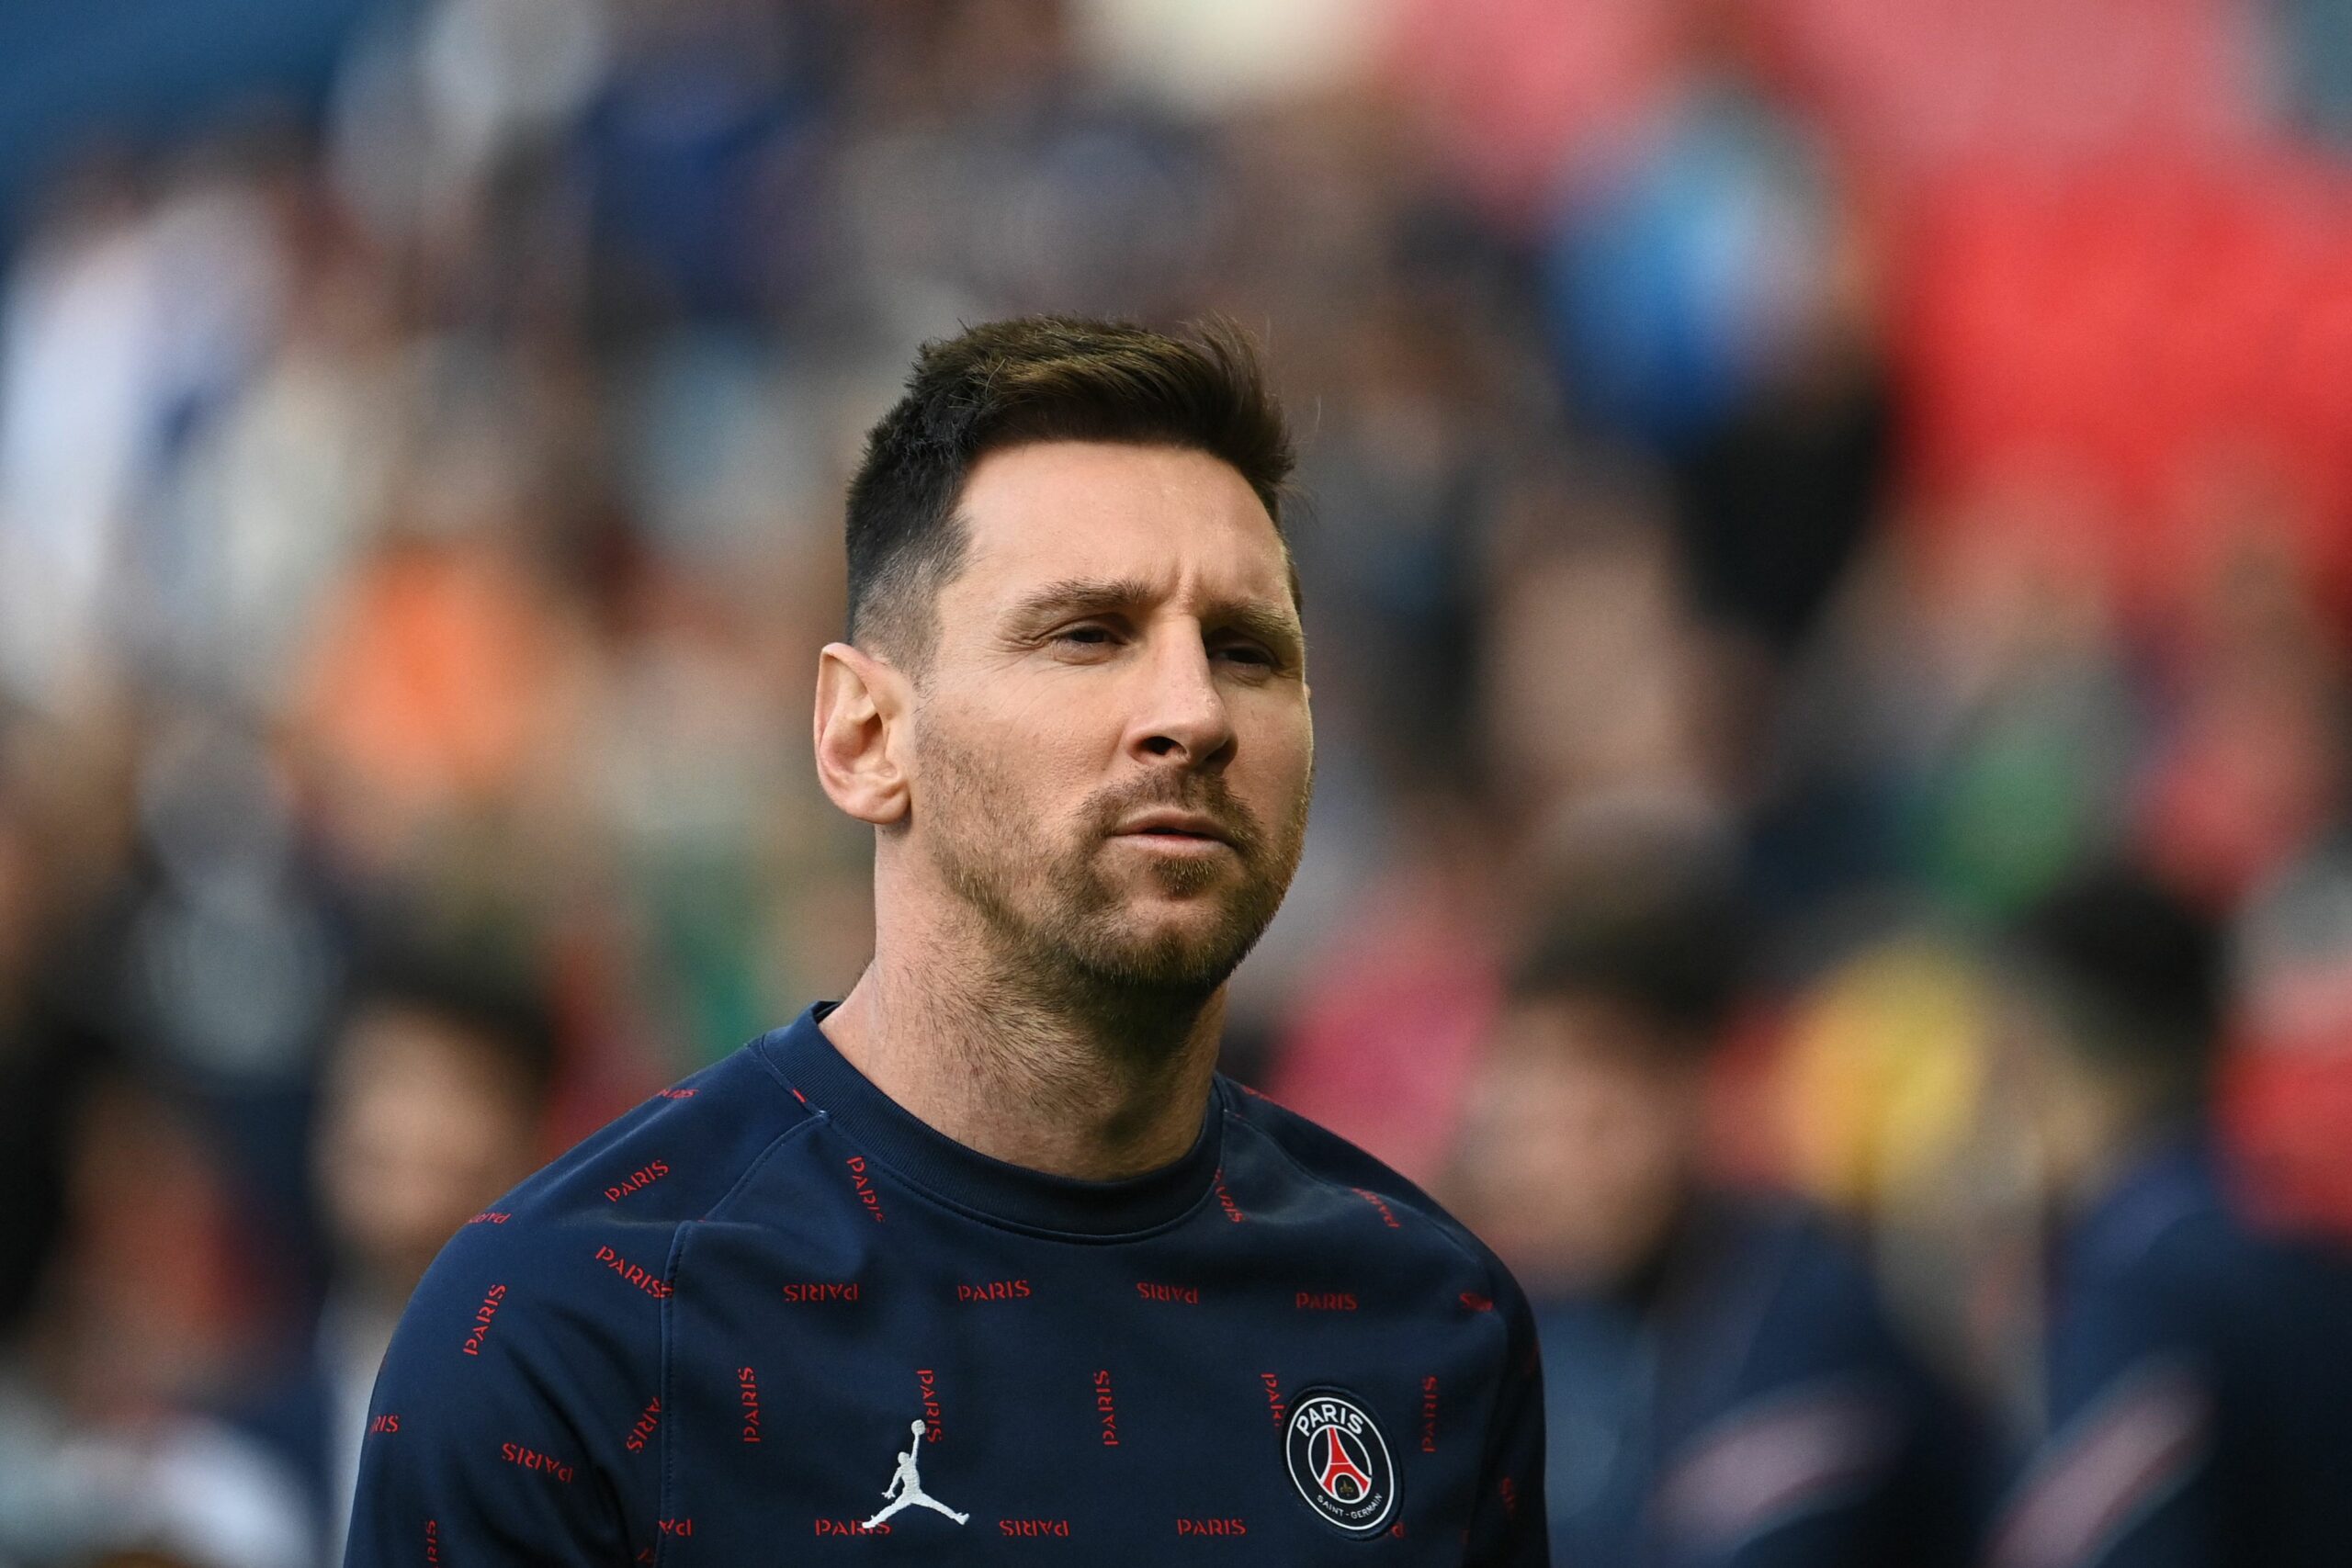 Paris Saint-Germain's Argentinian forward Lionel Messi looks on as he warms up prior to the start of the French L1 football match between Paris-Saint Germain (PSG) and ES Troyes AC at The Parc des Princes Stadium in Paris on May 8, 2022. (Photo by Anne-Christine POUJOULAT / AFP) (Photo by ANNE-CHRISTINE POUJOULAT/AFP via Getty Images)